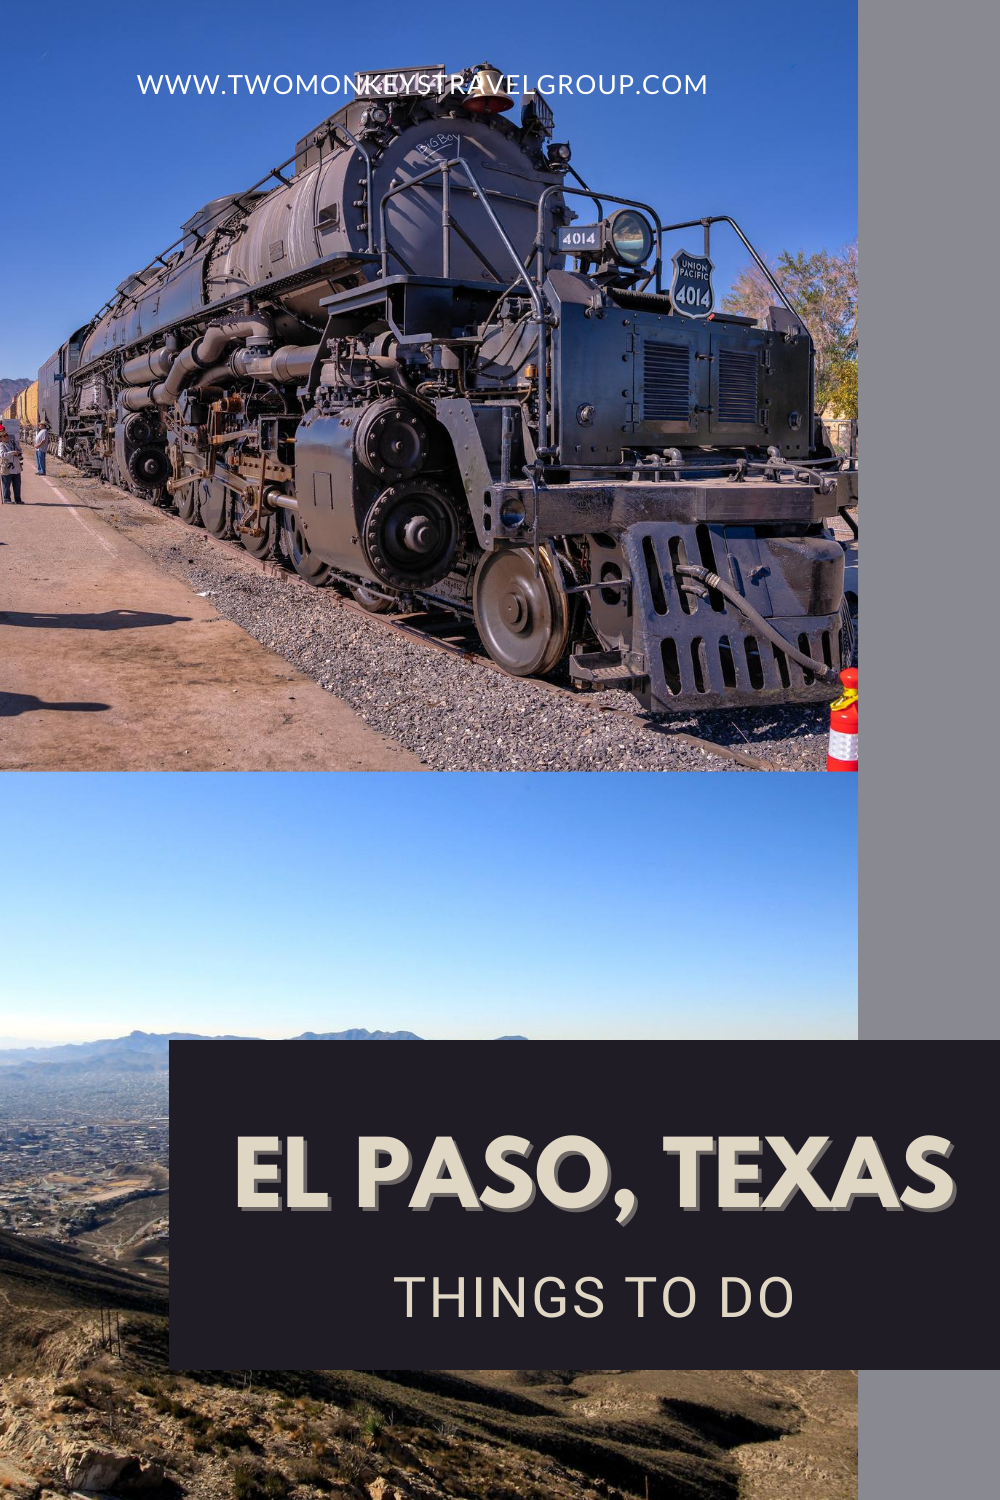 15 Things To Do in El Paso, Texas [Weekend DIY Itinerary to El Paso]